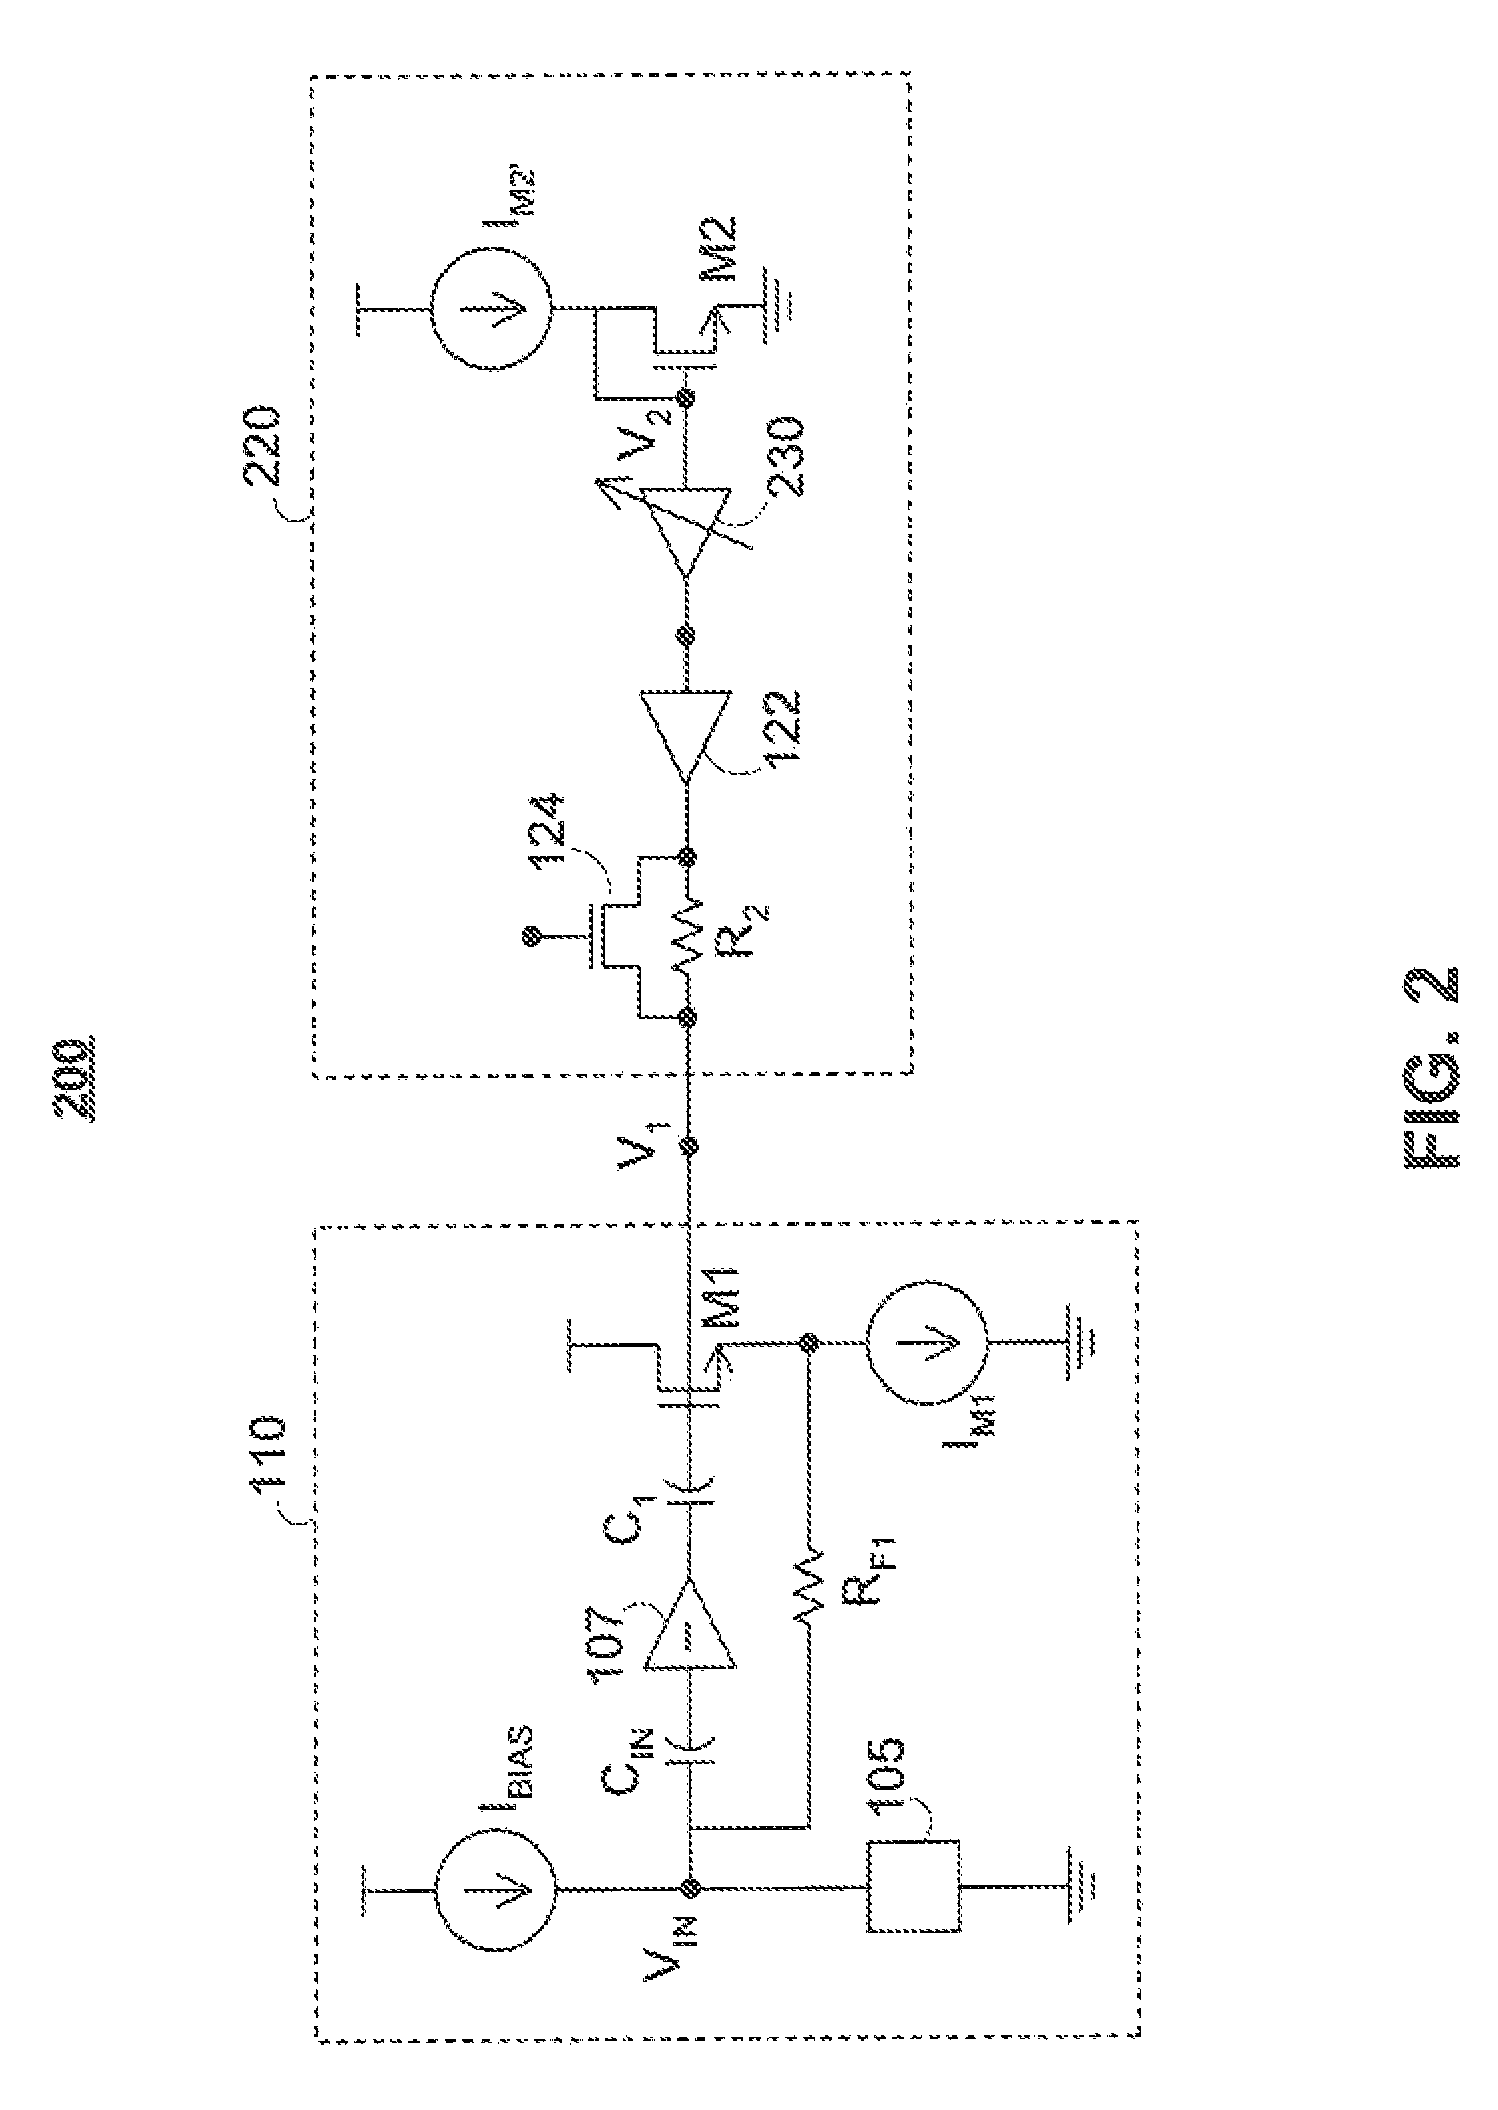 Open loop DC control for a transimpedance feedback amplifier